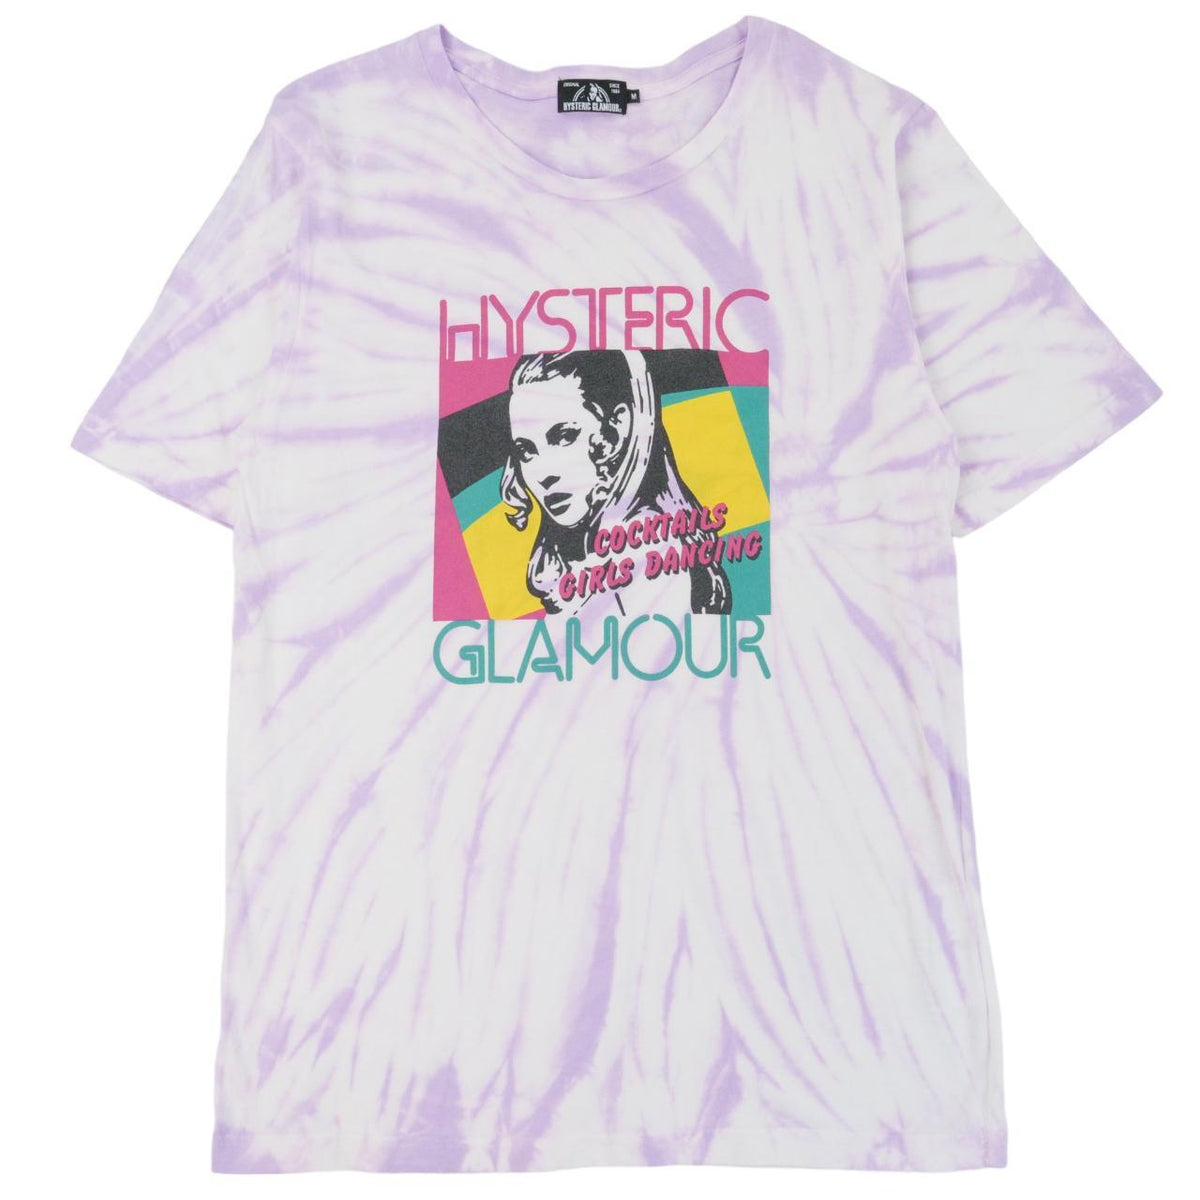 Vintage Hysteric Glamour Graphic Tie Dye T Shirt Size M